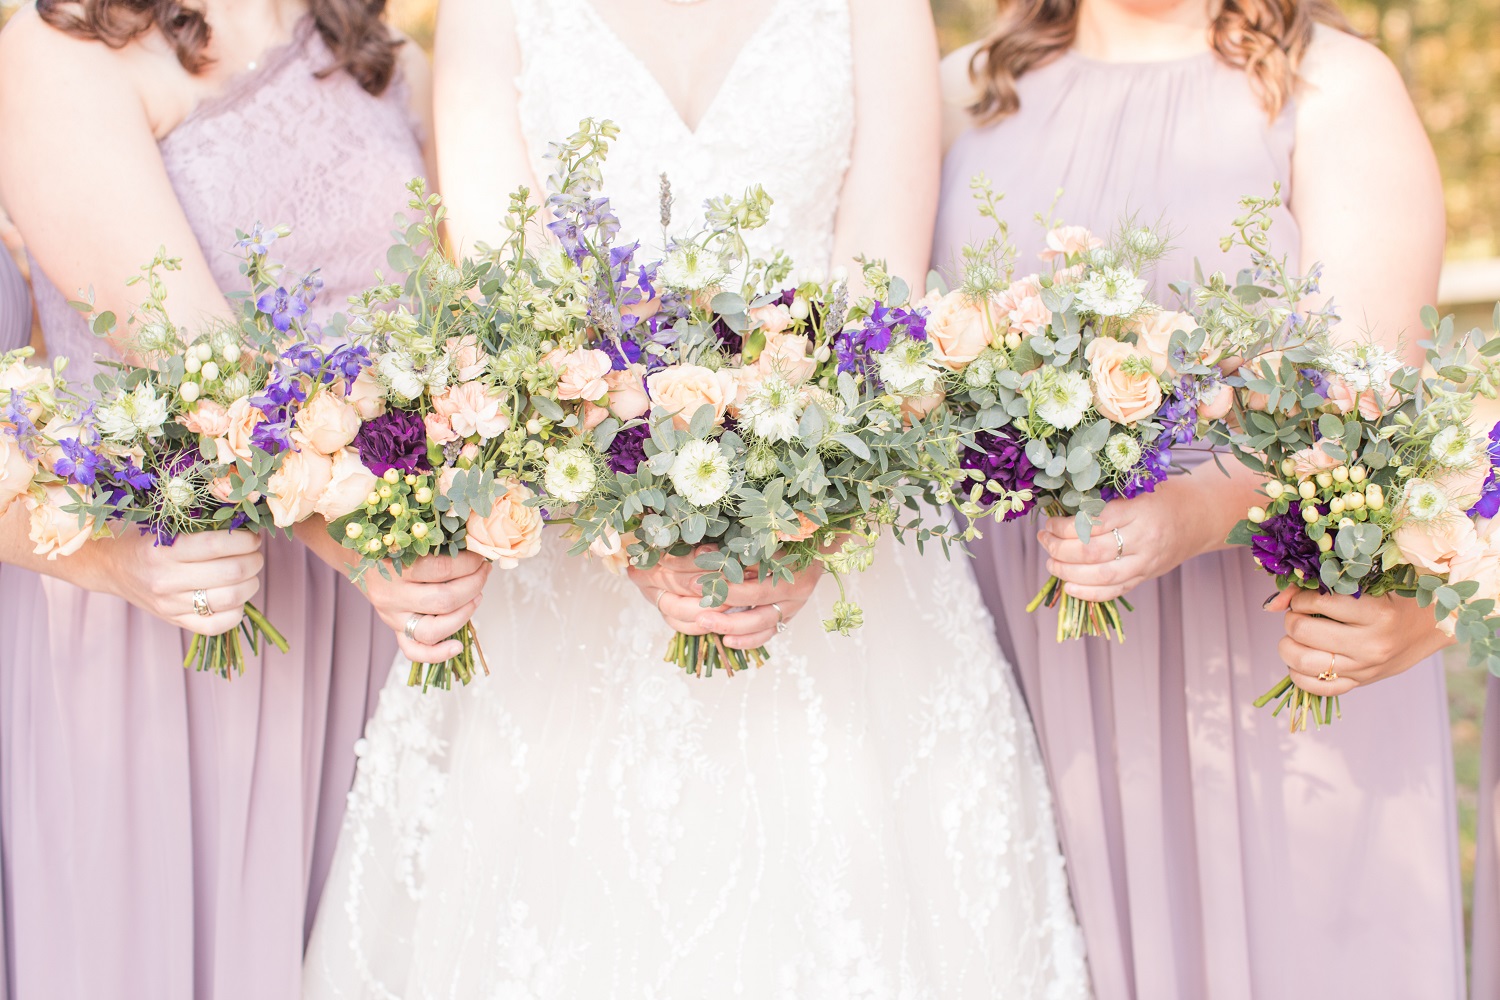 Bride in v neck white wedding dress holding Purple, coral and white blooms with greenery pulled together in a beautiful bridal bouquet designed by durham florist poppy belle floral design